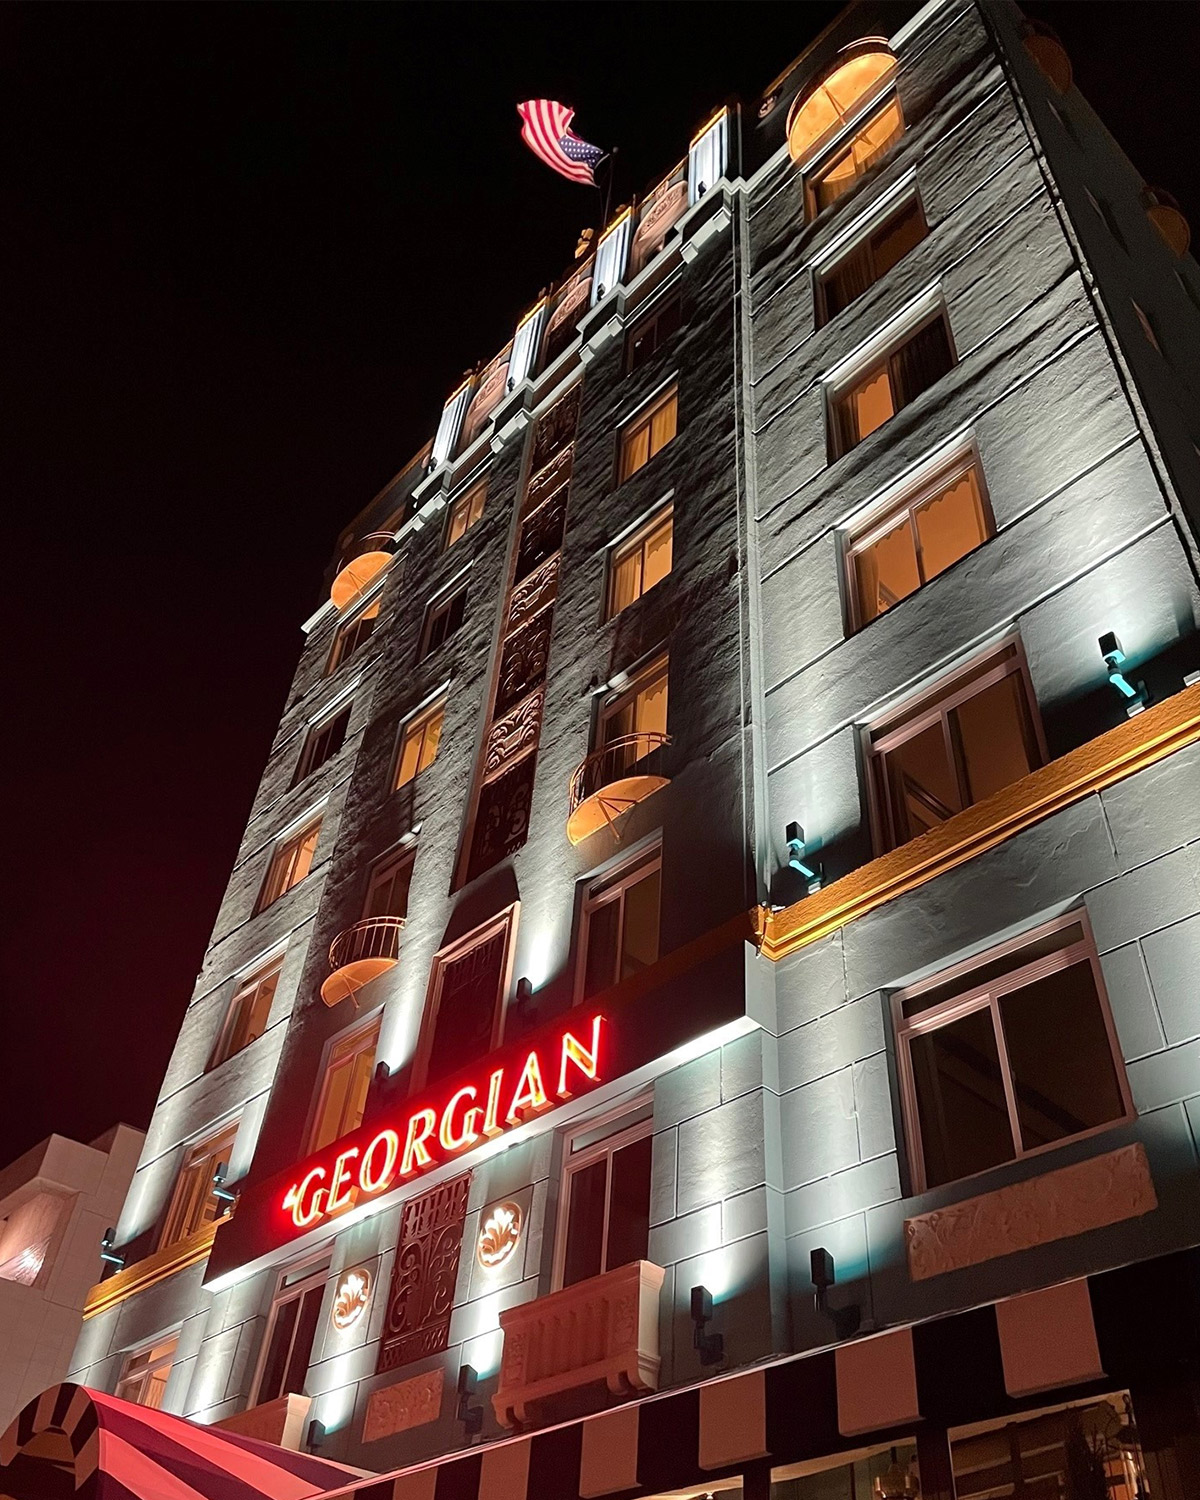 The Georgian hotel illuminated at night with a glowing red neon sign, featuring classic architectural details and an American flag waving atop the building.